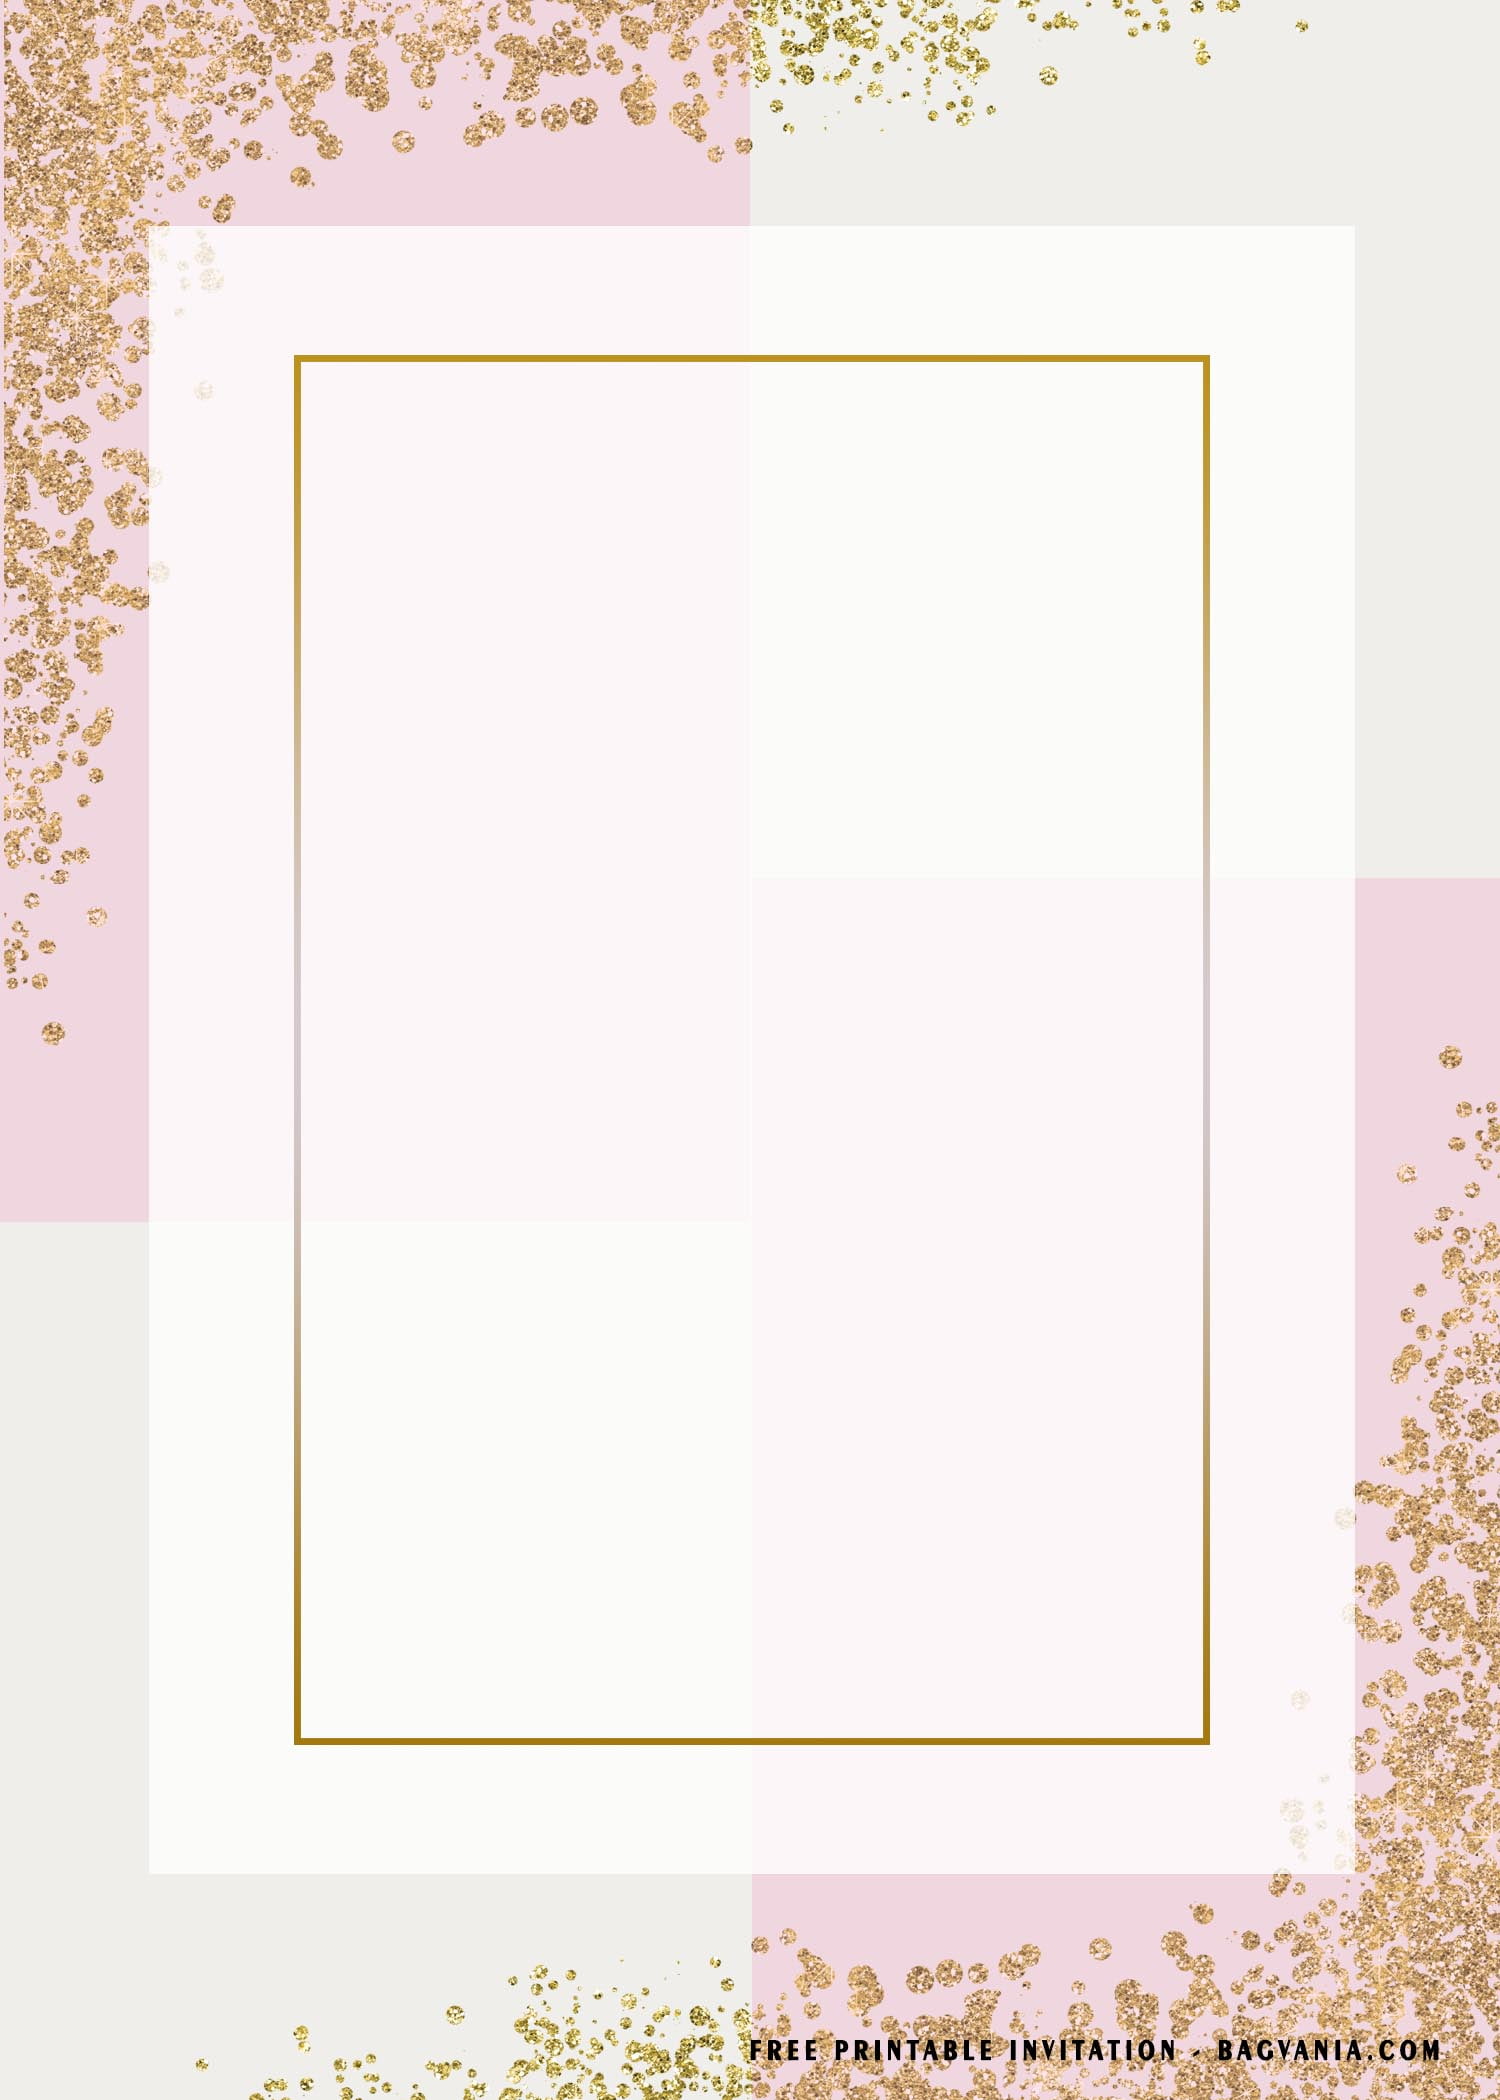 free-printable-gold-lace-invitation-templates-for-any-occasions-lace-invitations